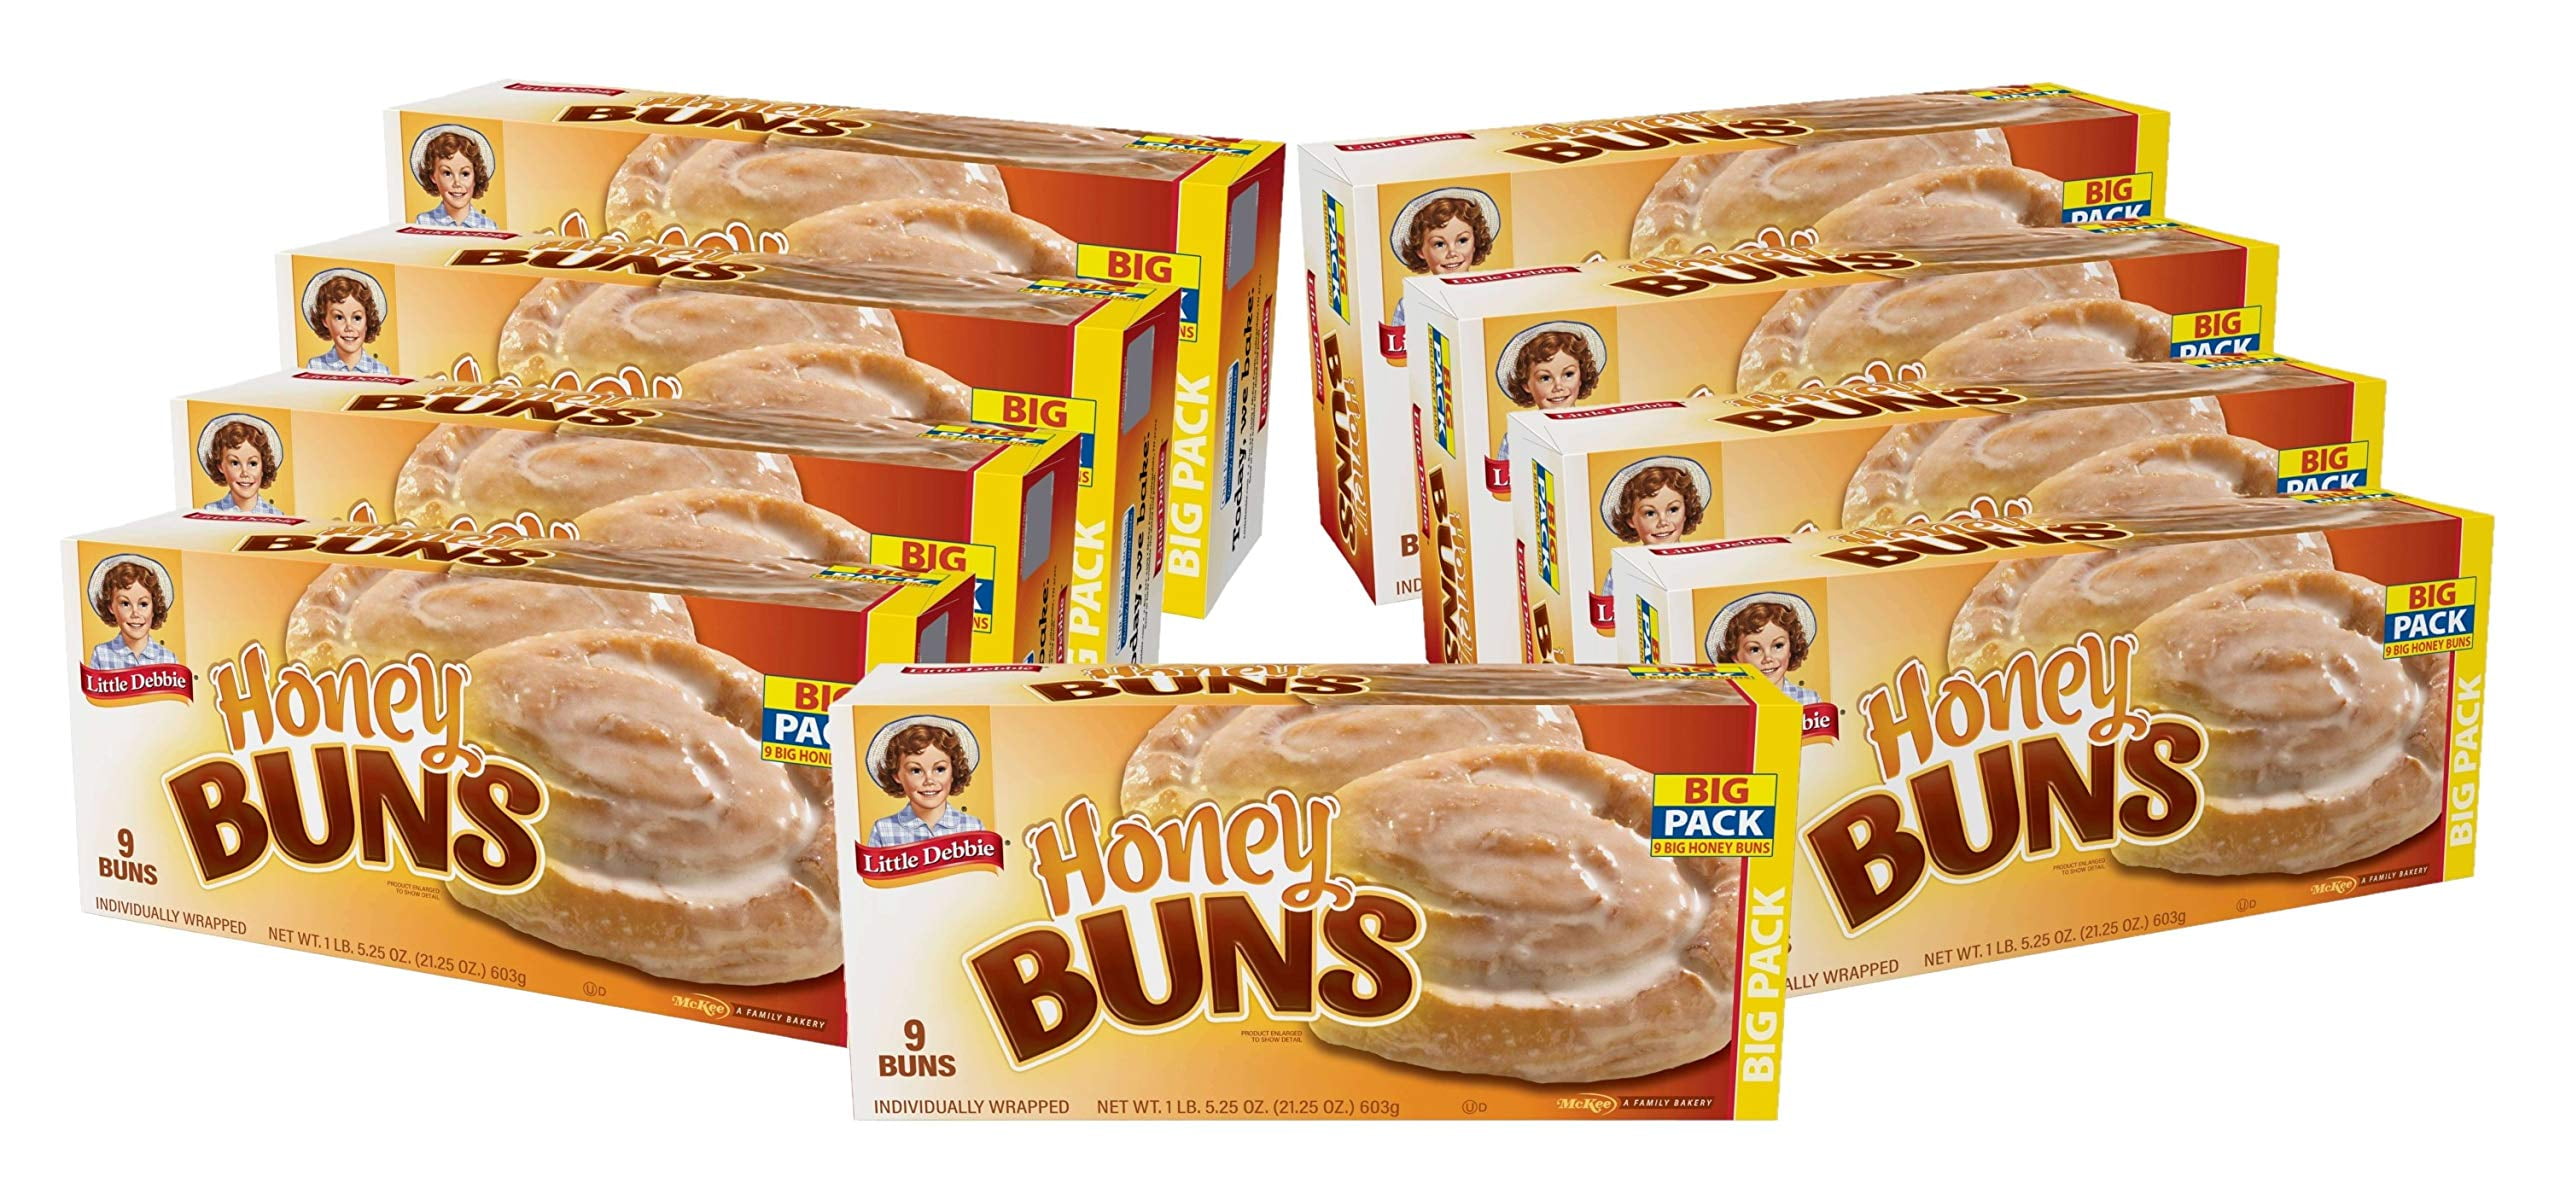 Little Debbie Honey Buns, 12 Boxes, 72 Individually Wrapped